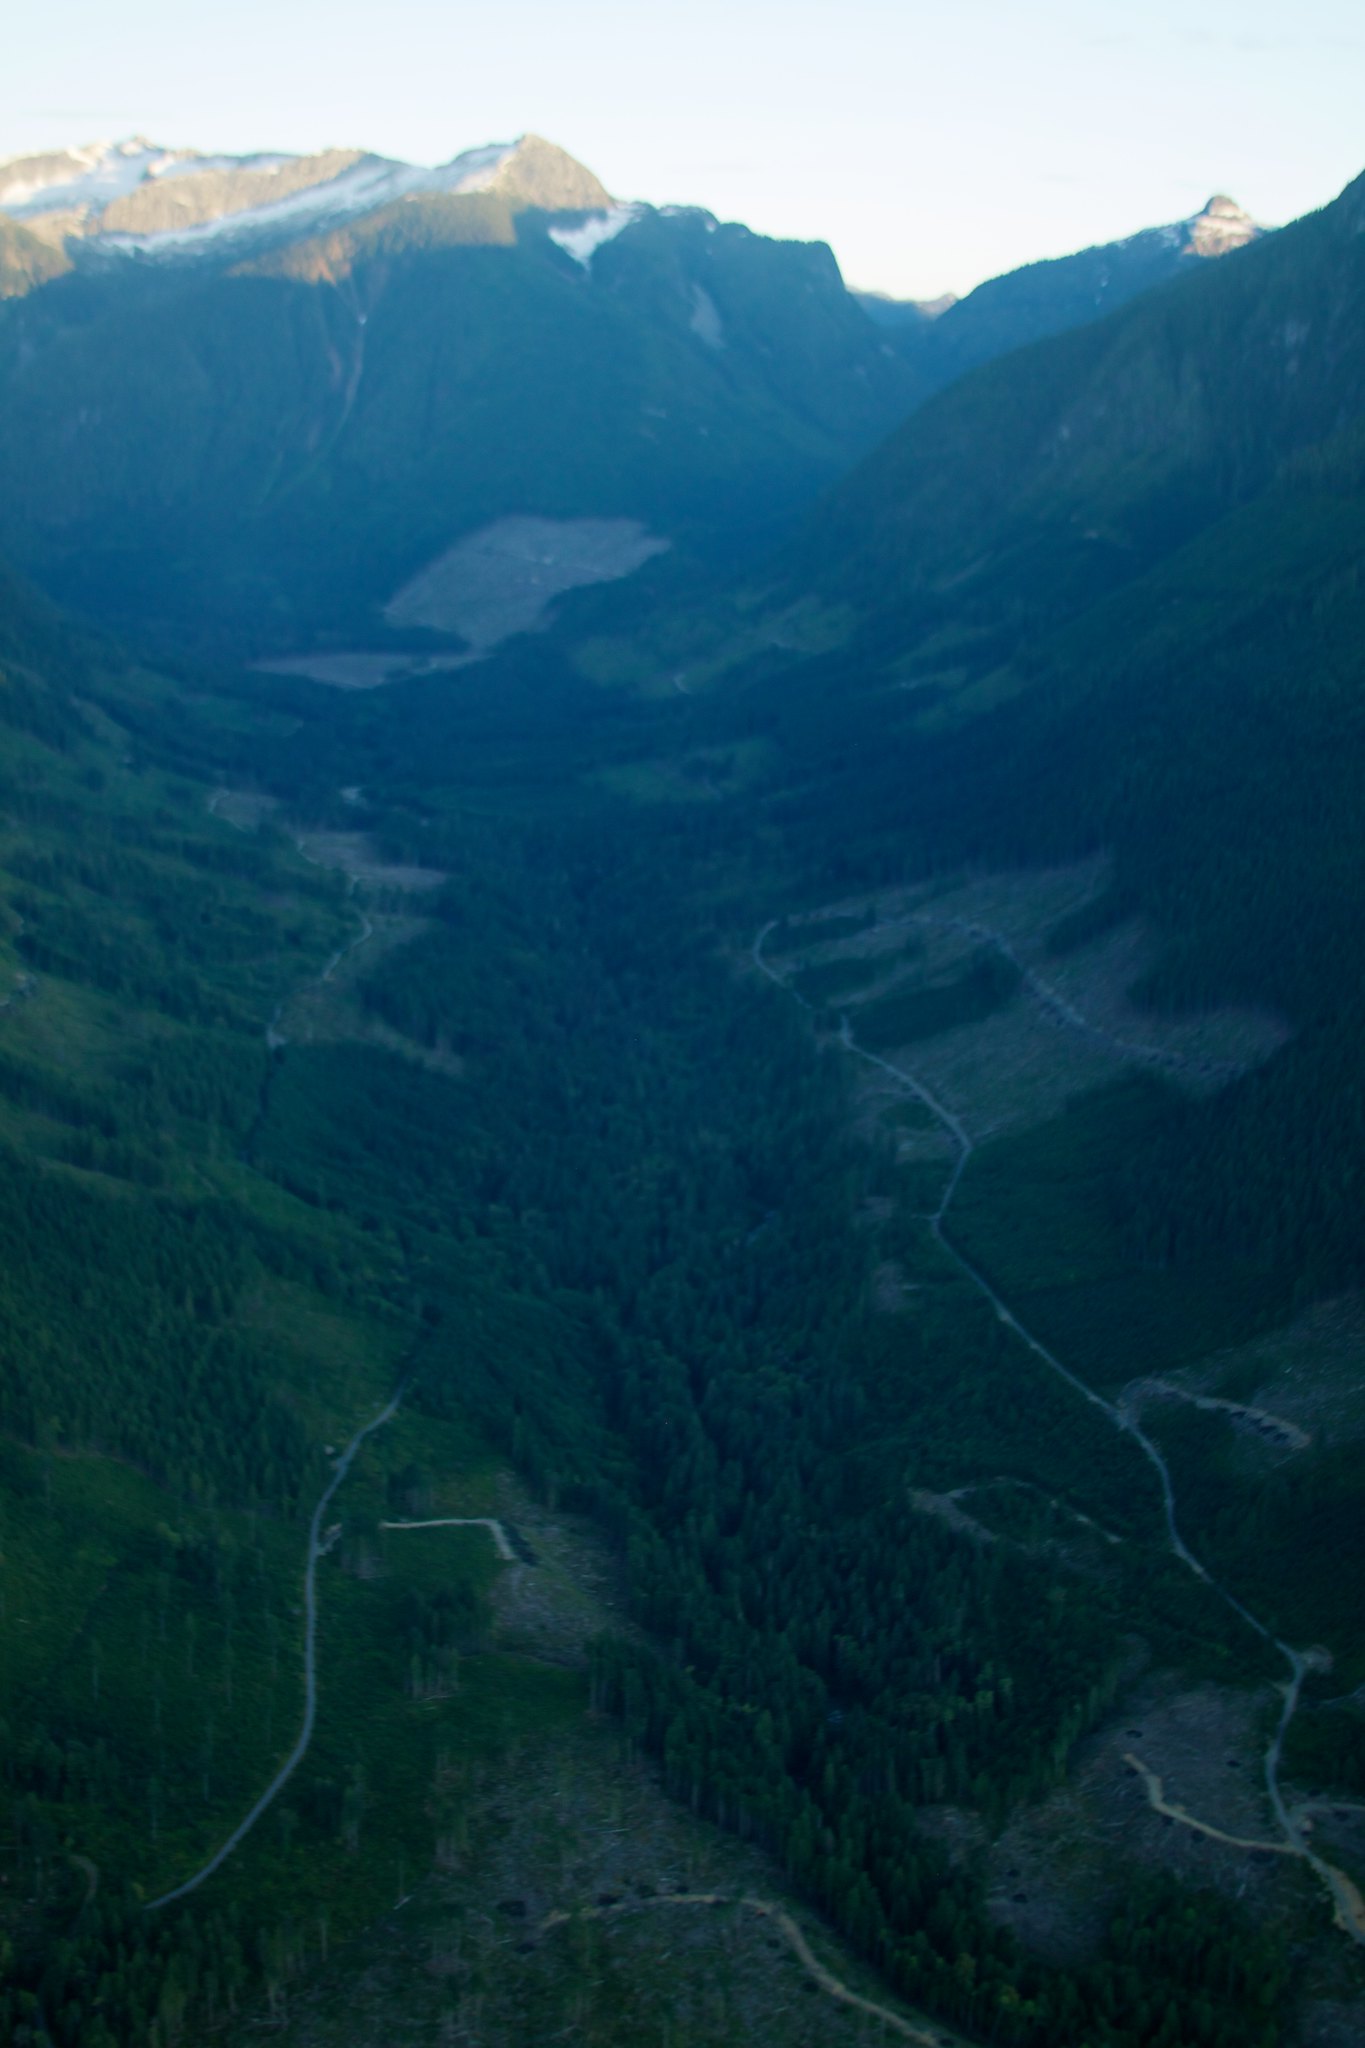 Aerial view of mountainsides that have large sections of trees missing due to logging.